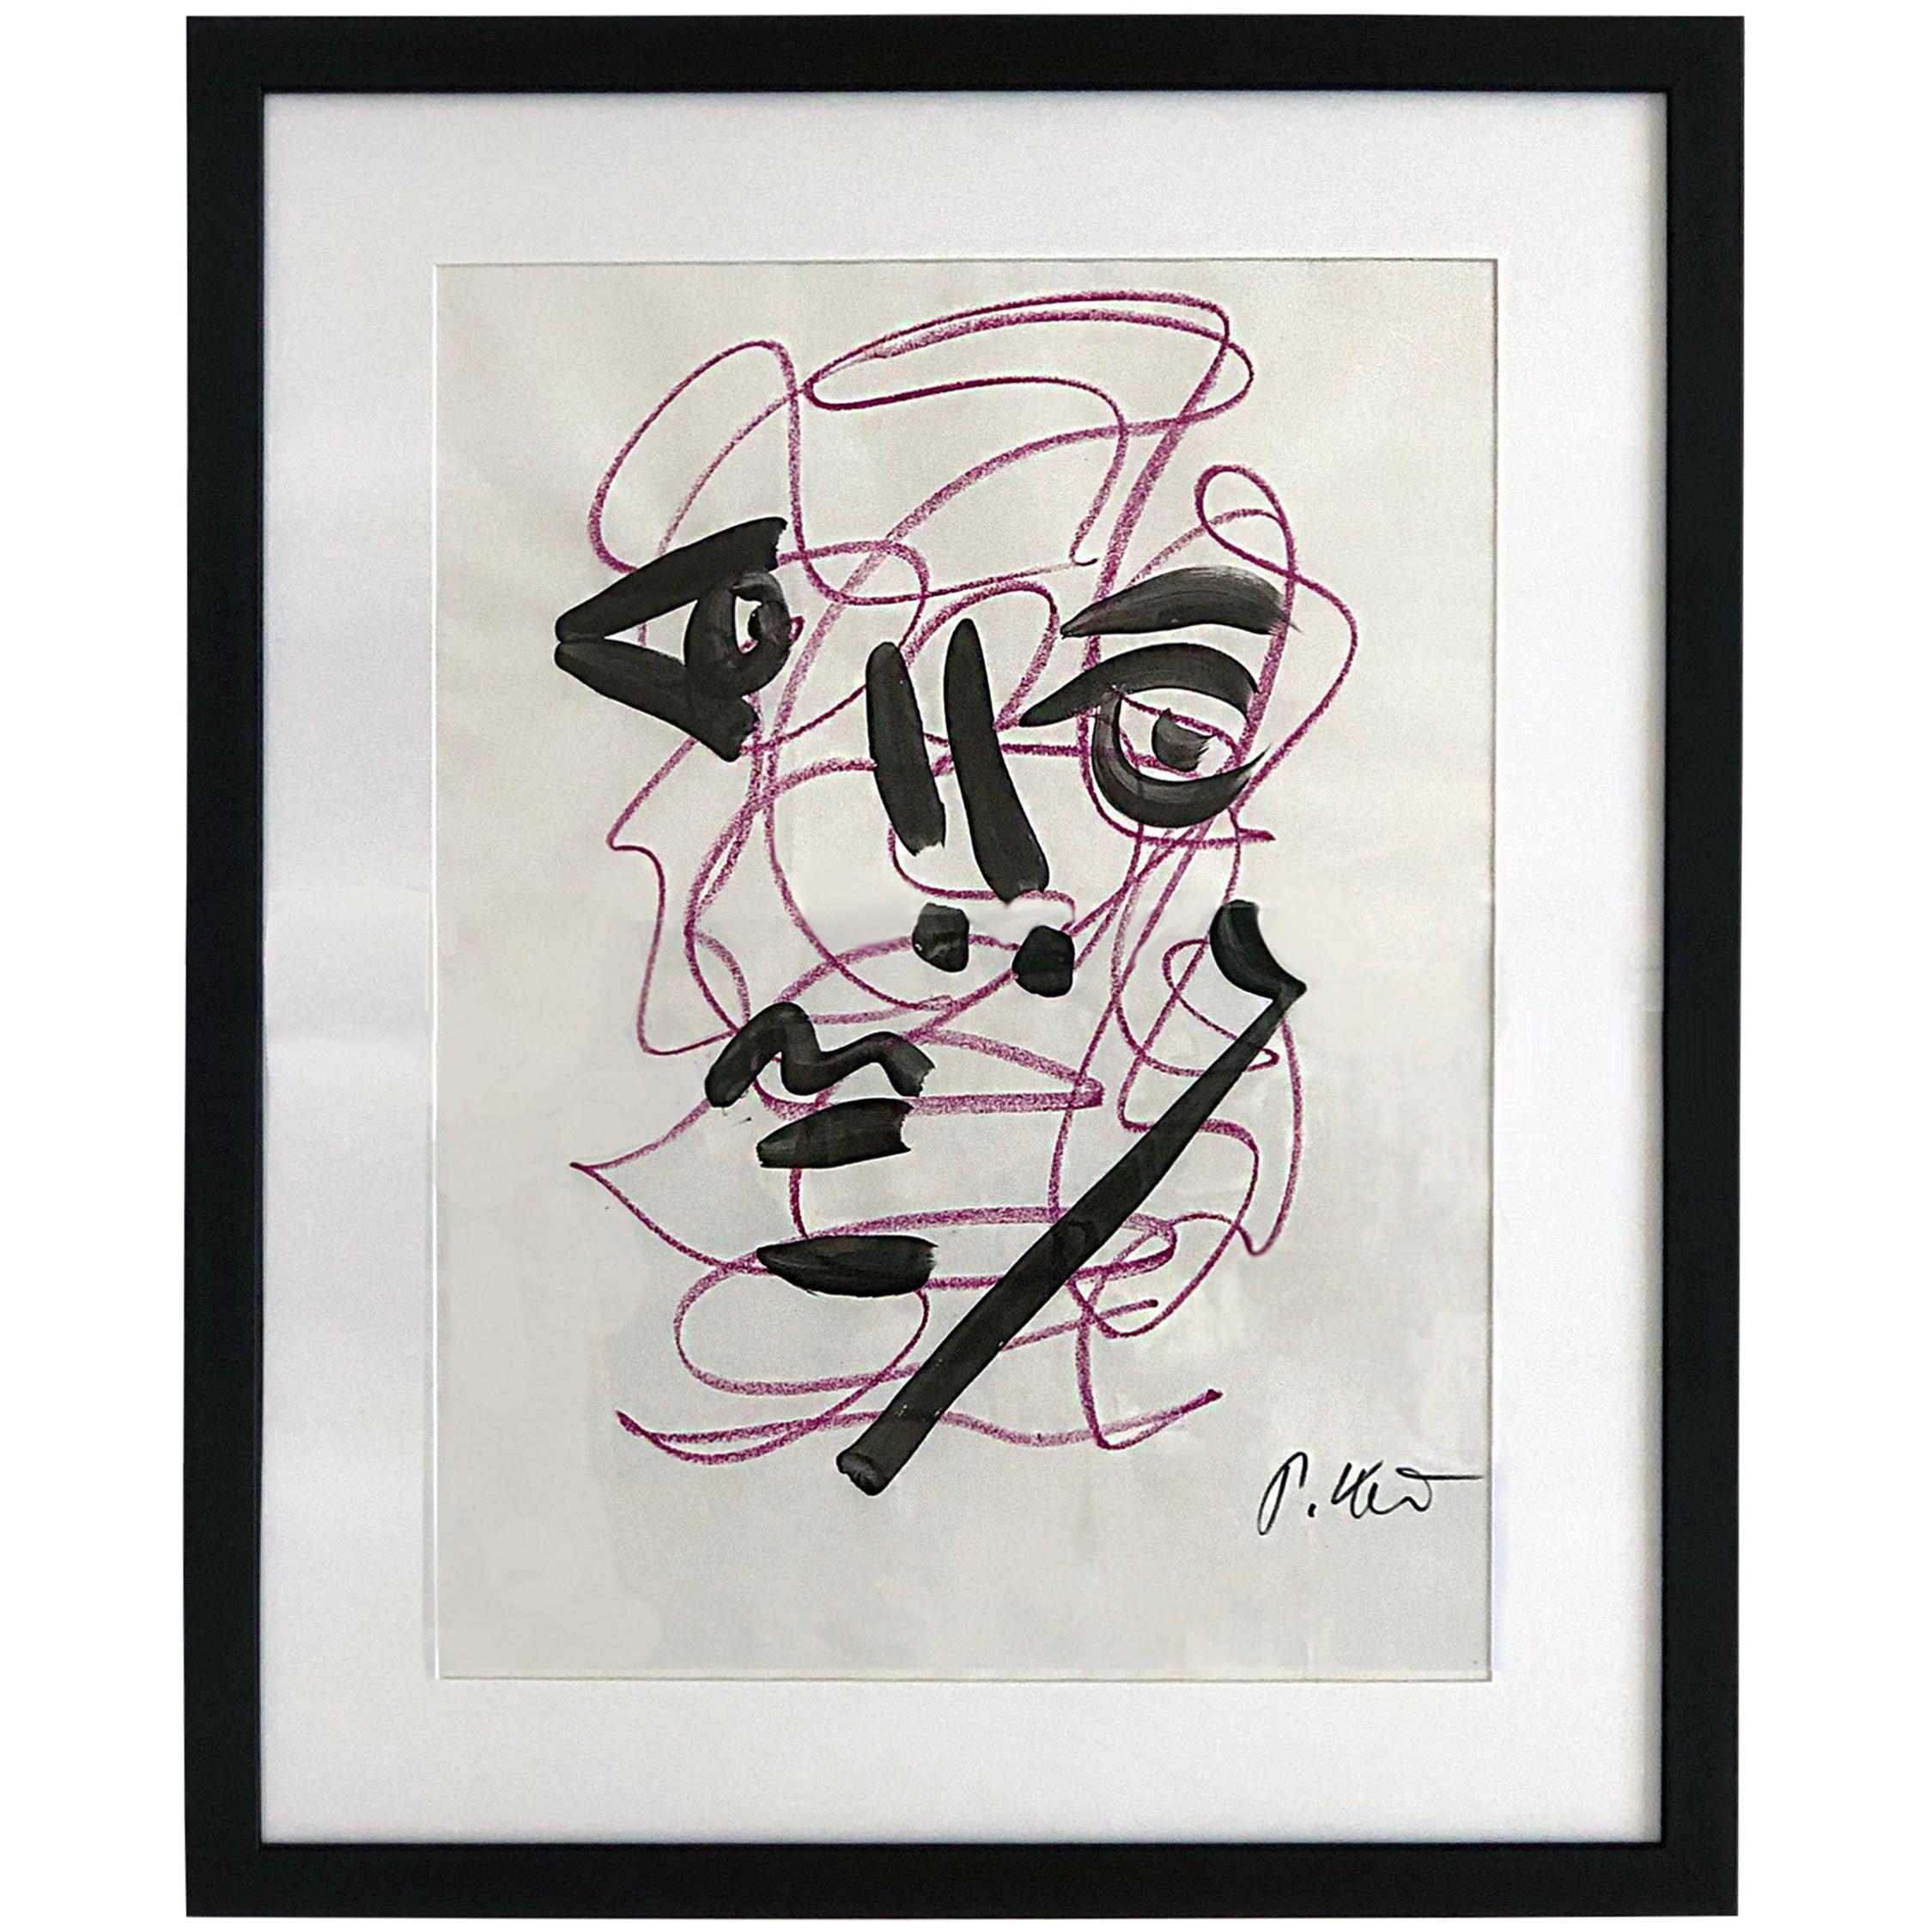 Original Peter Keil Framed Acrylic and Pen on Paper